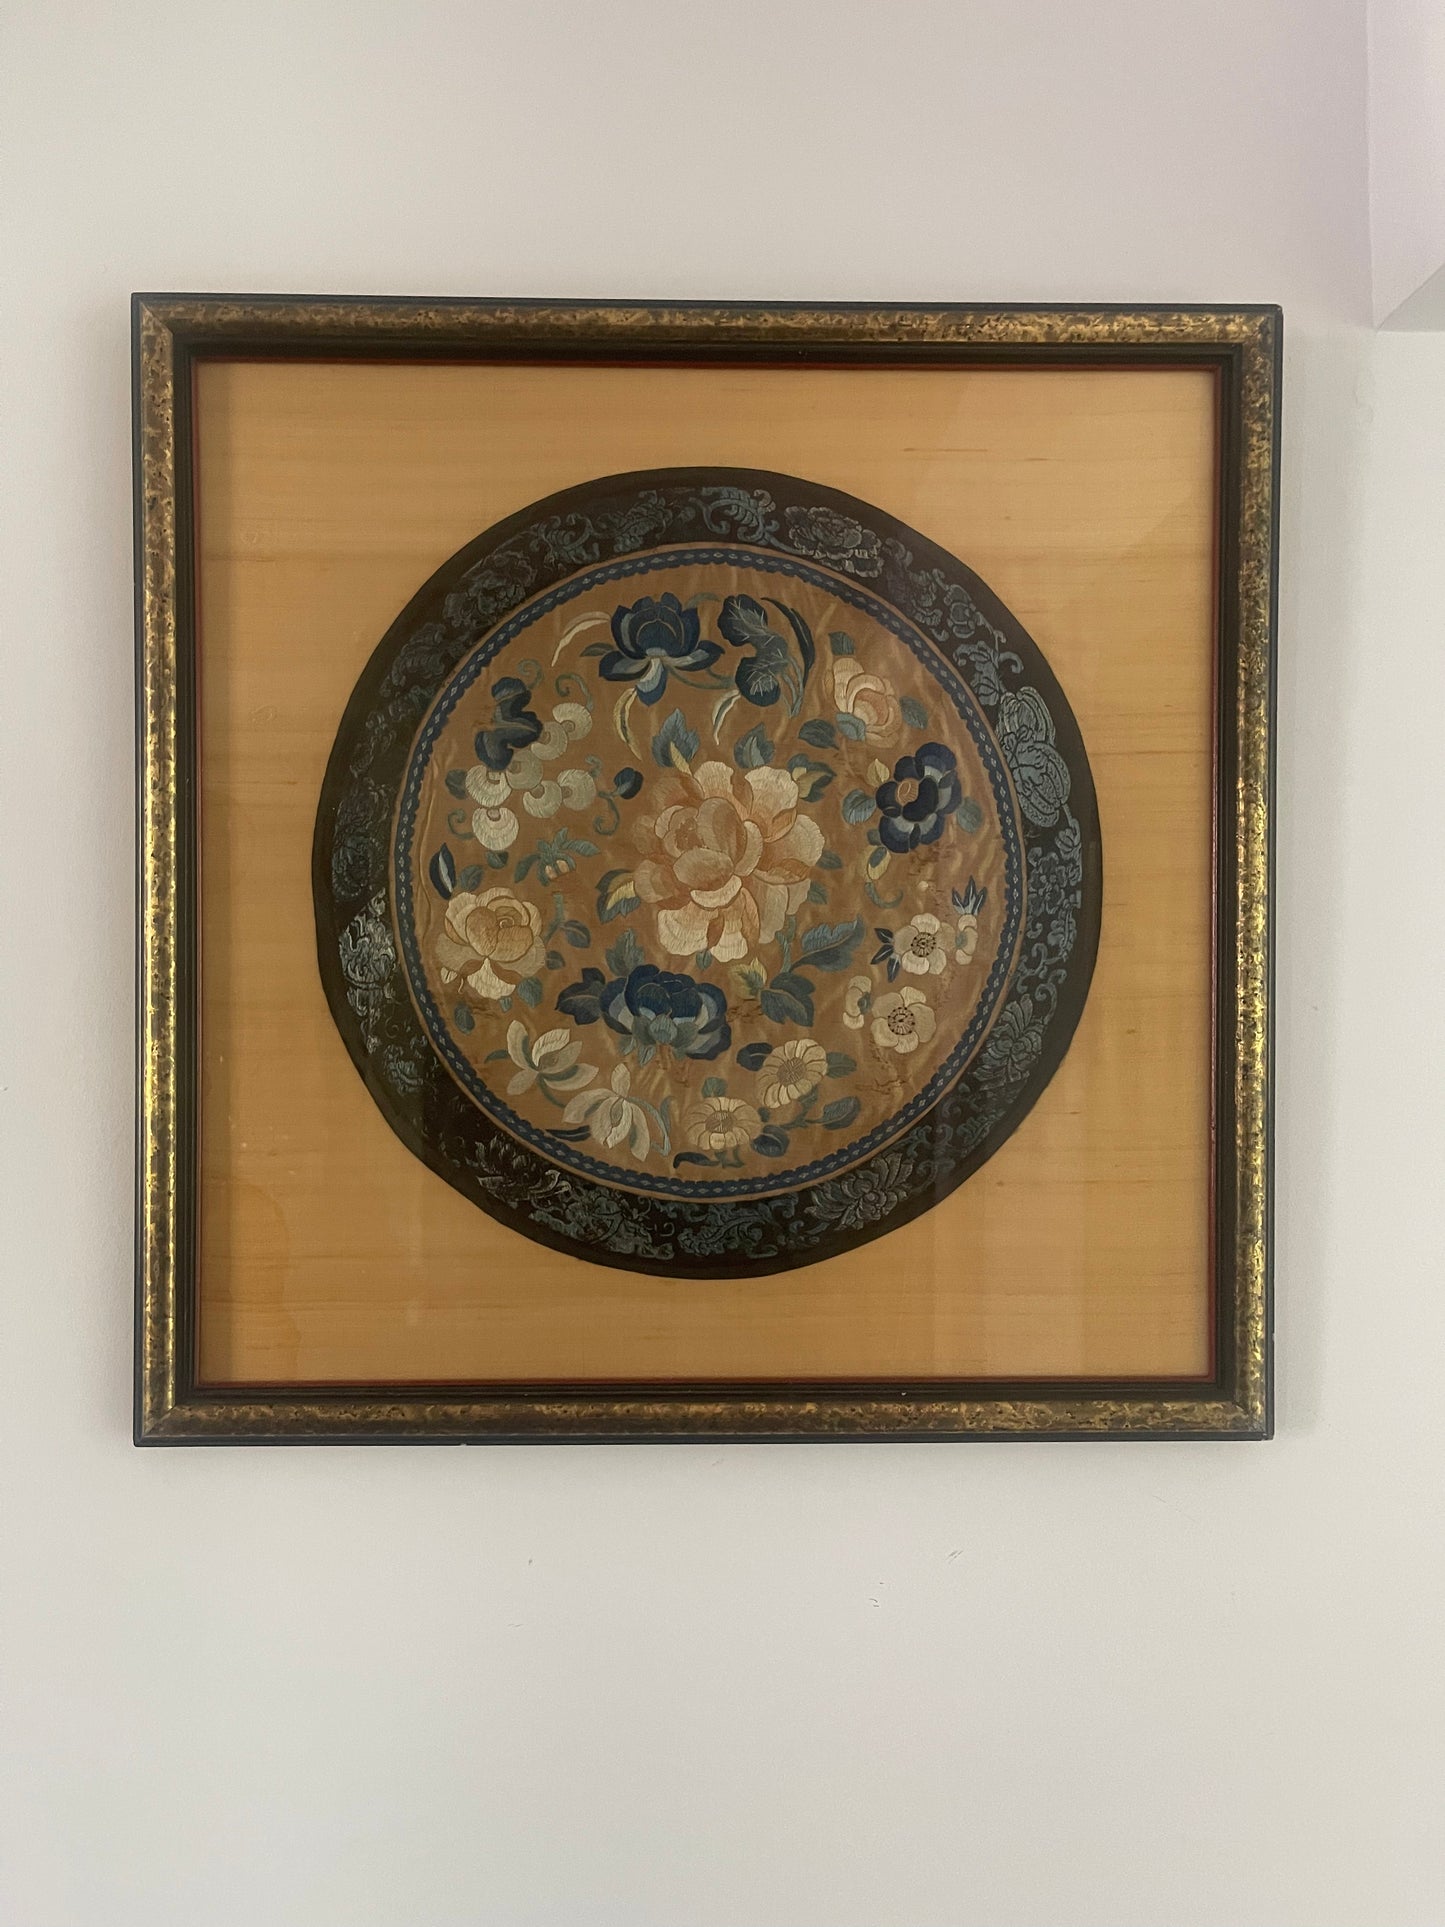 A framed embroidered 19th Century rank badge